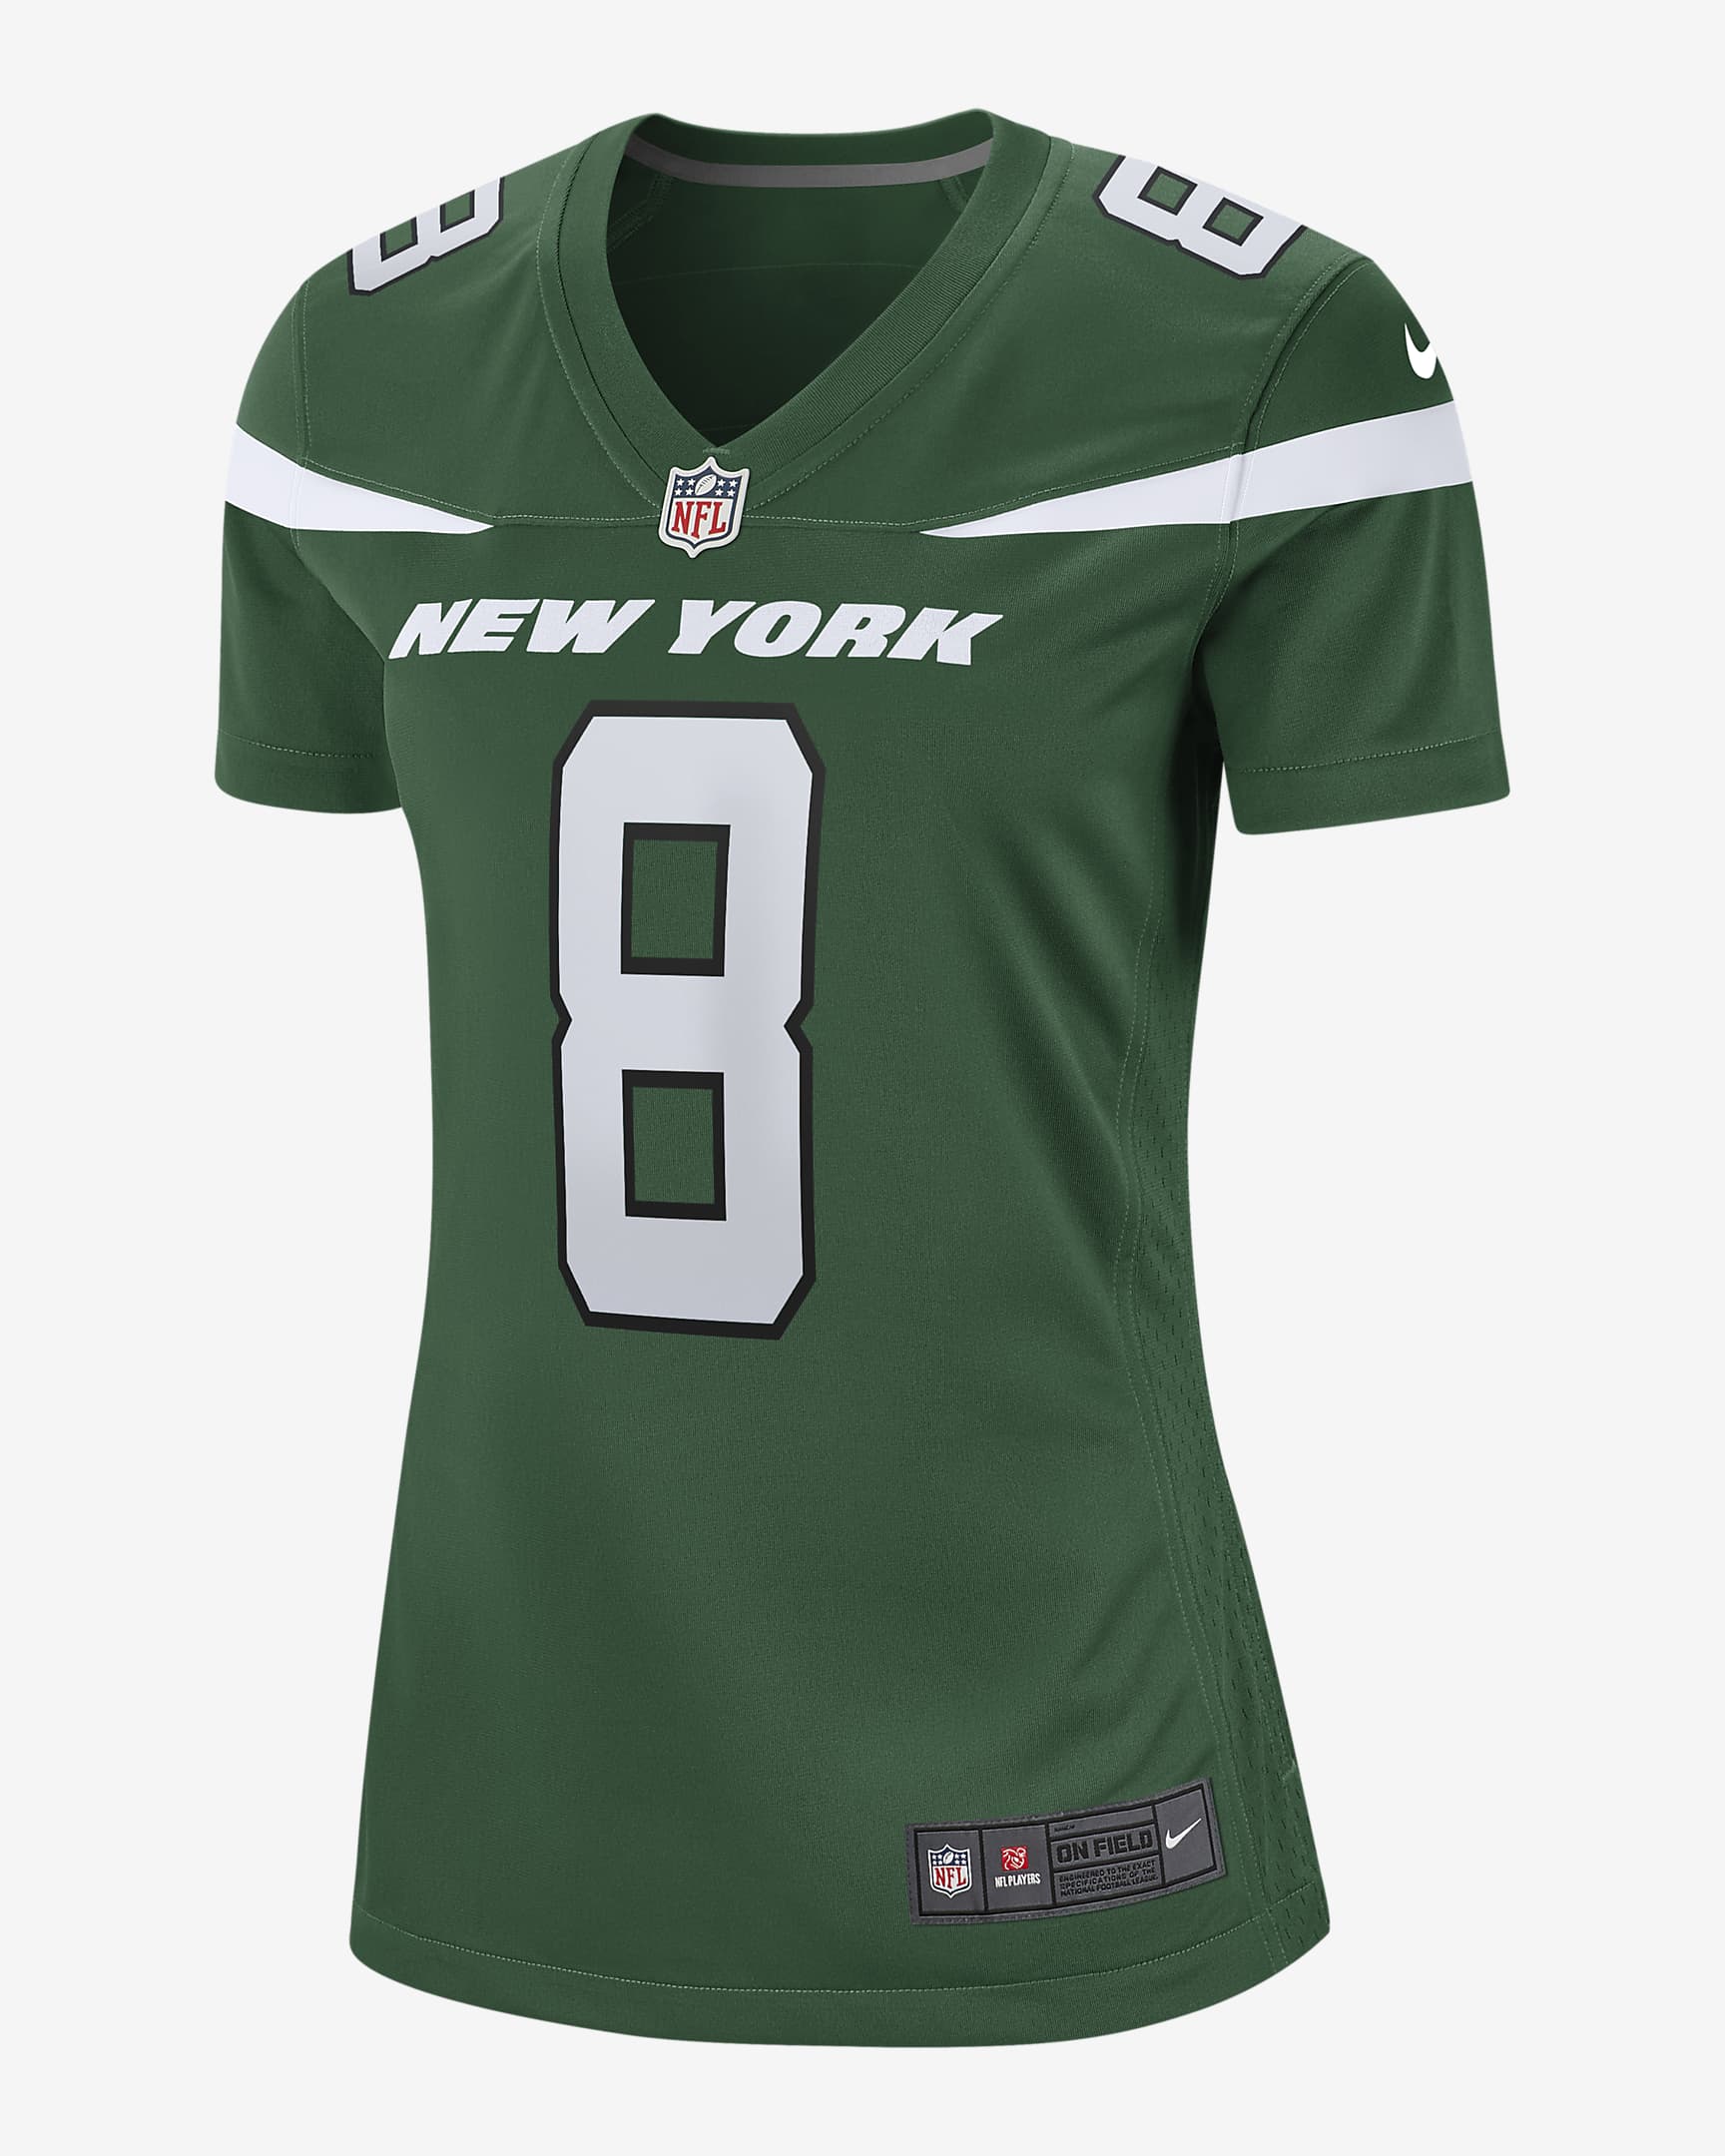 Aaron Rodgers New York Jets Women's Nike NFL Game Football Jersey. Nike.com